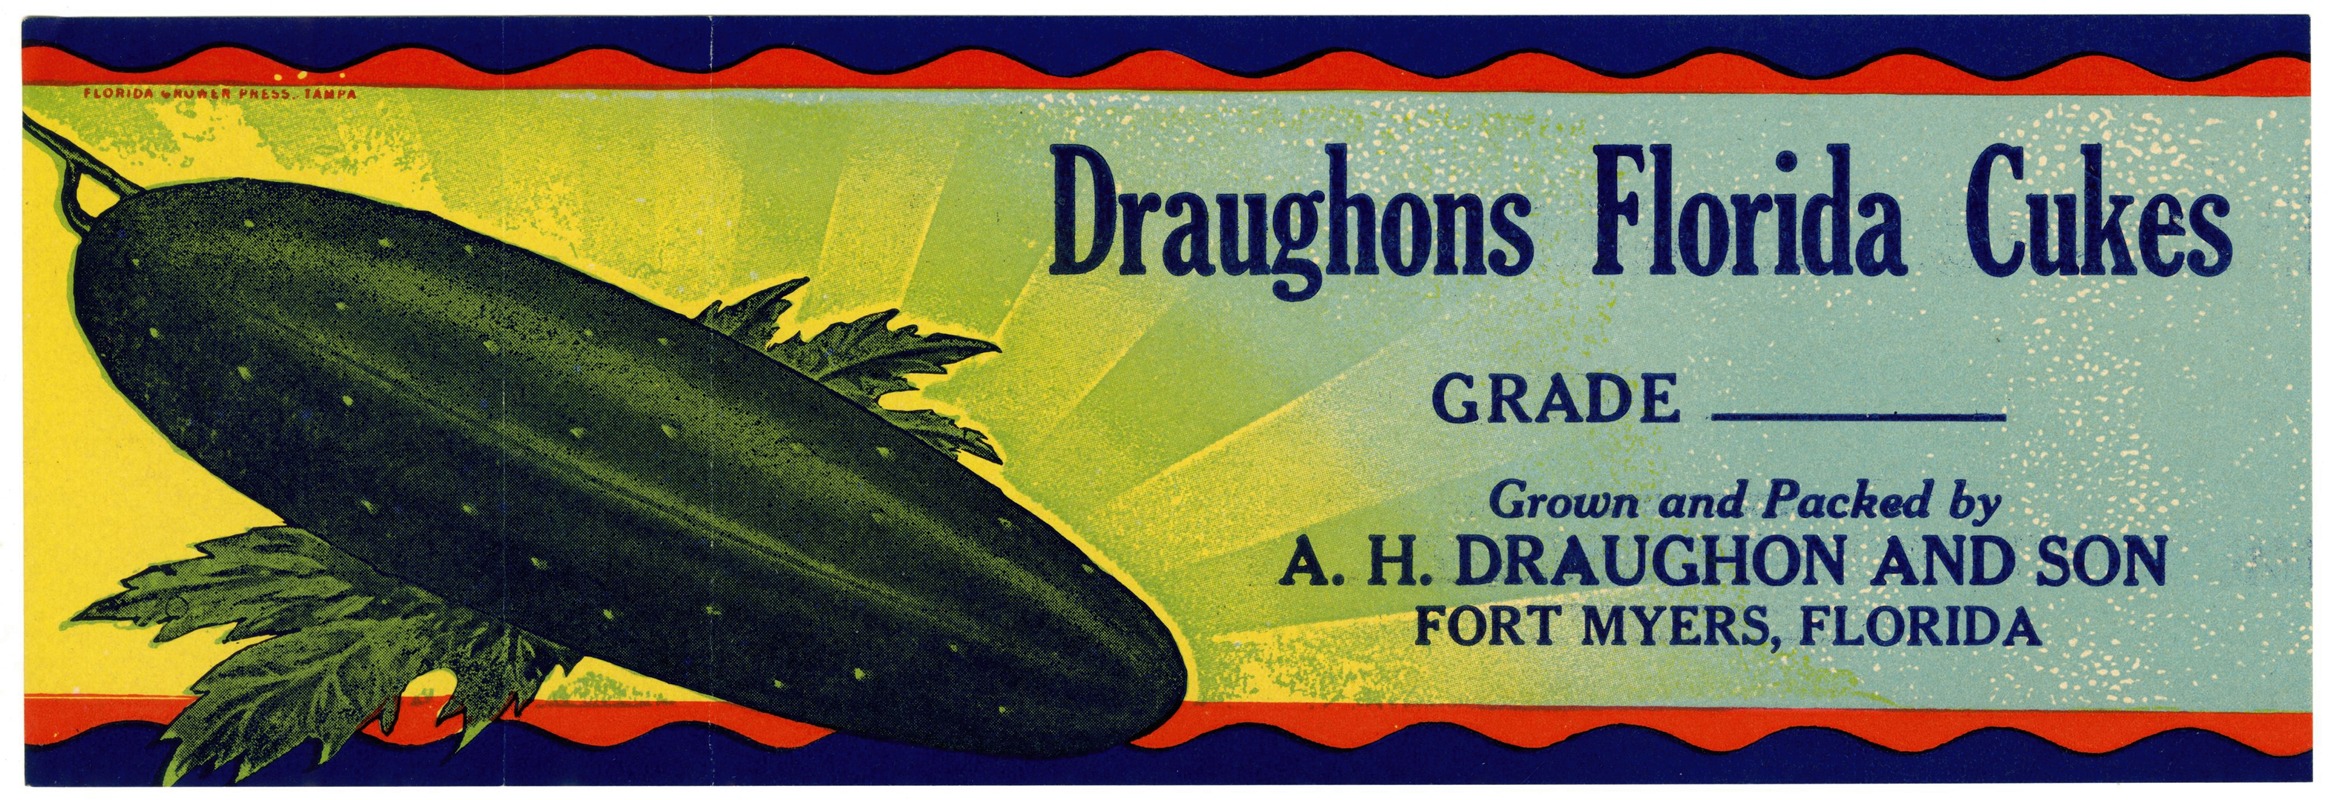 Anonymous - Cucumber Label for Draughons Florida Cuke